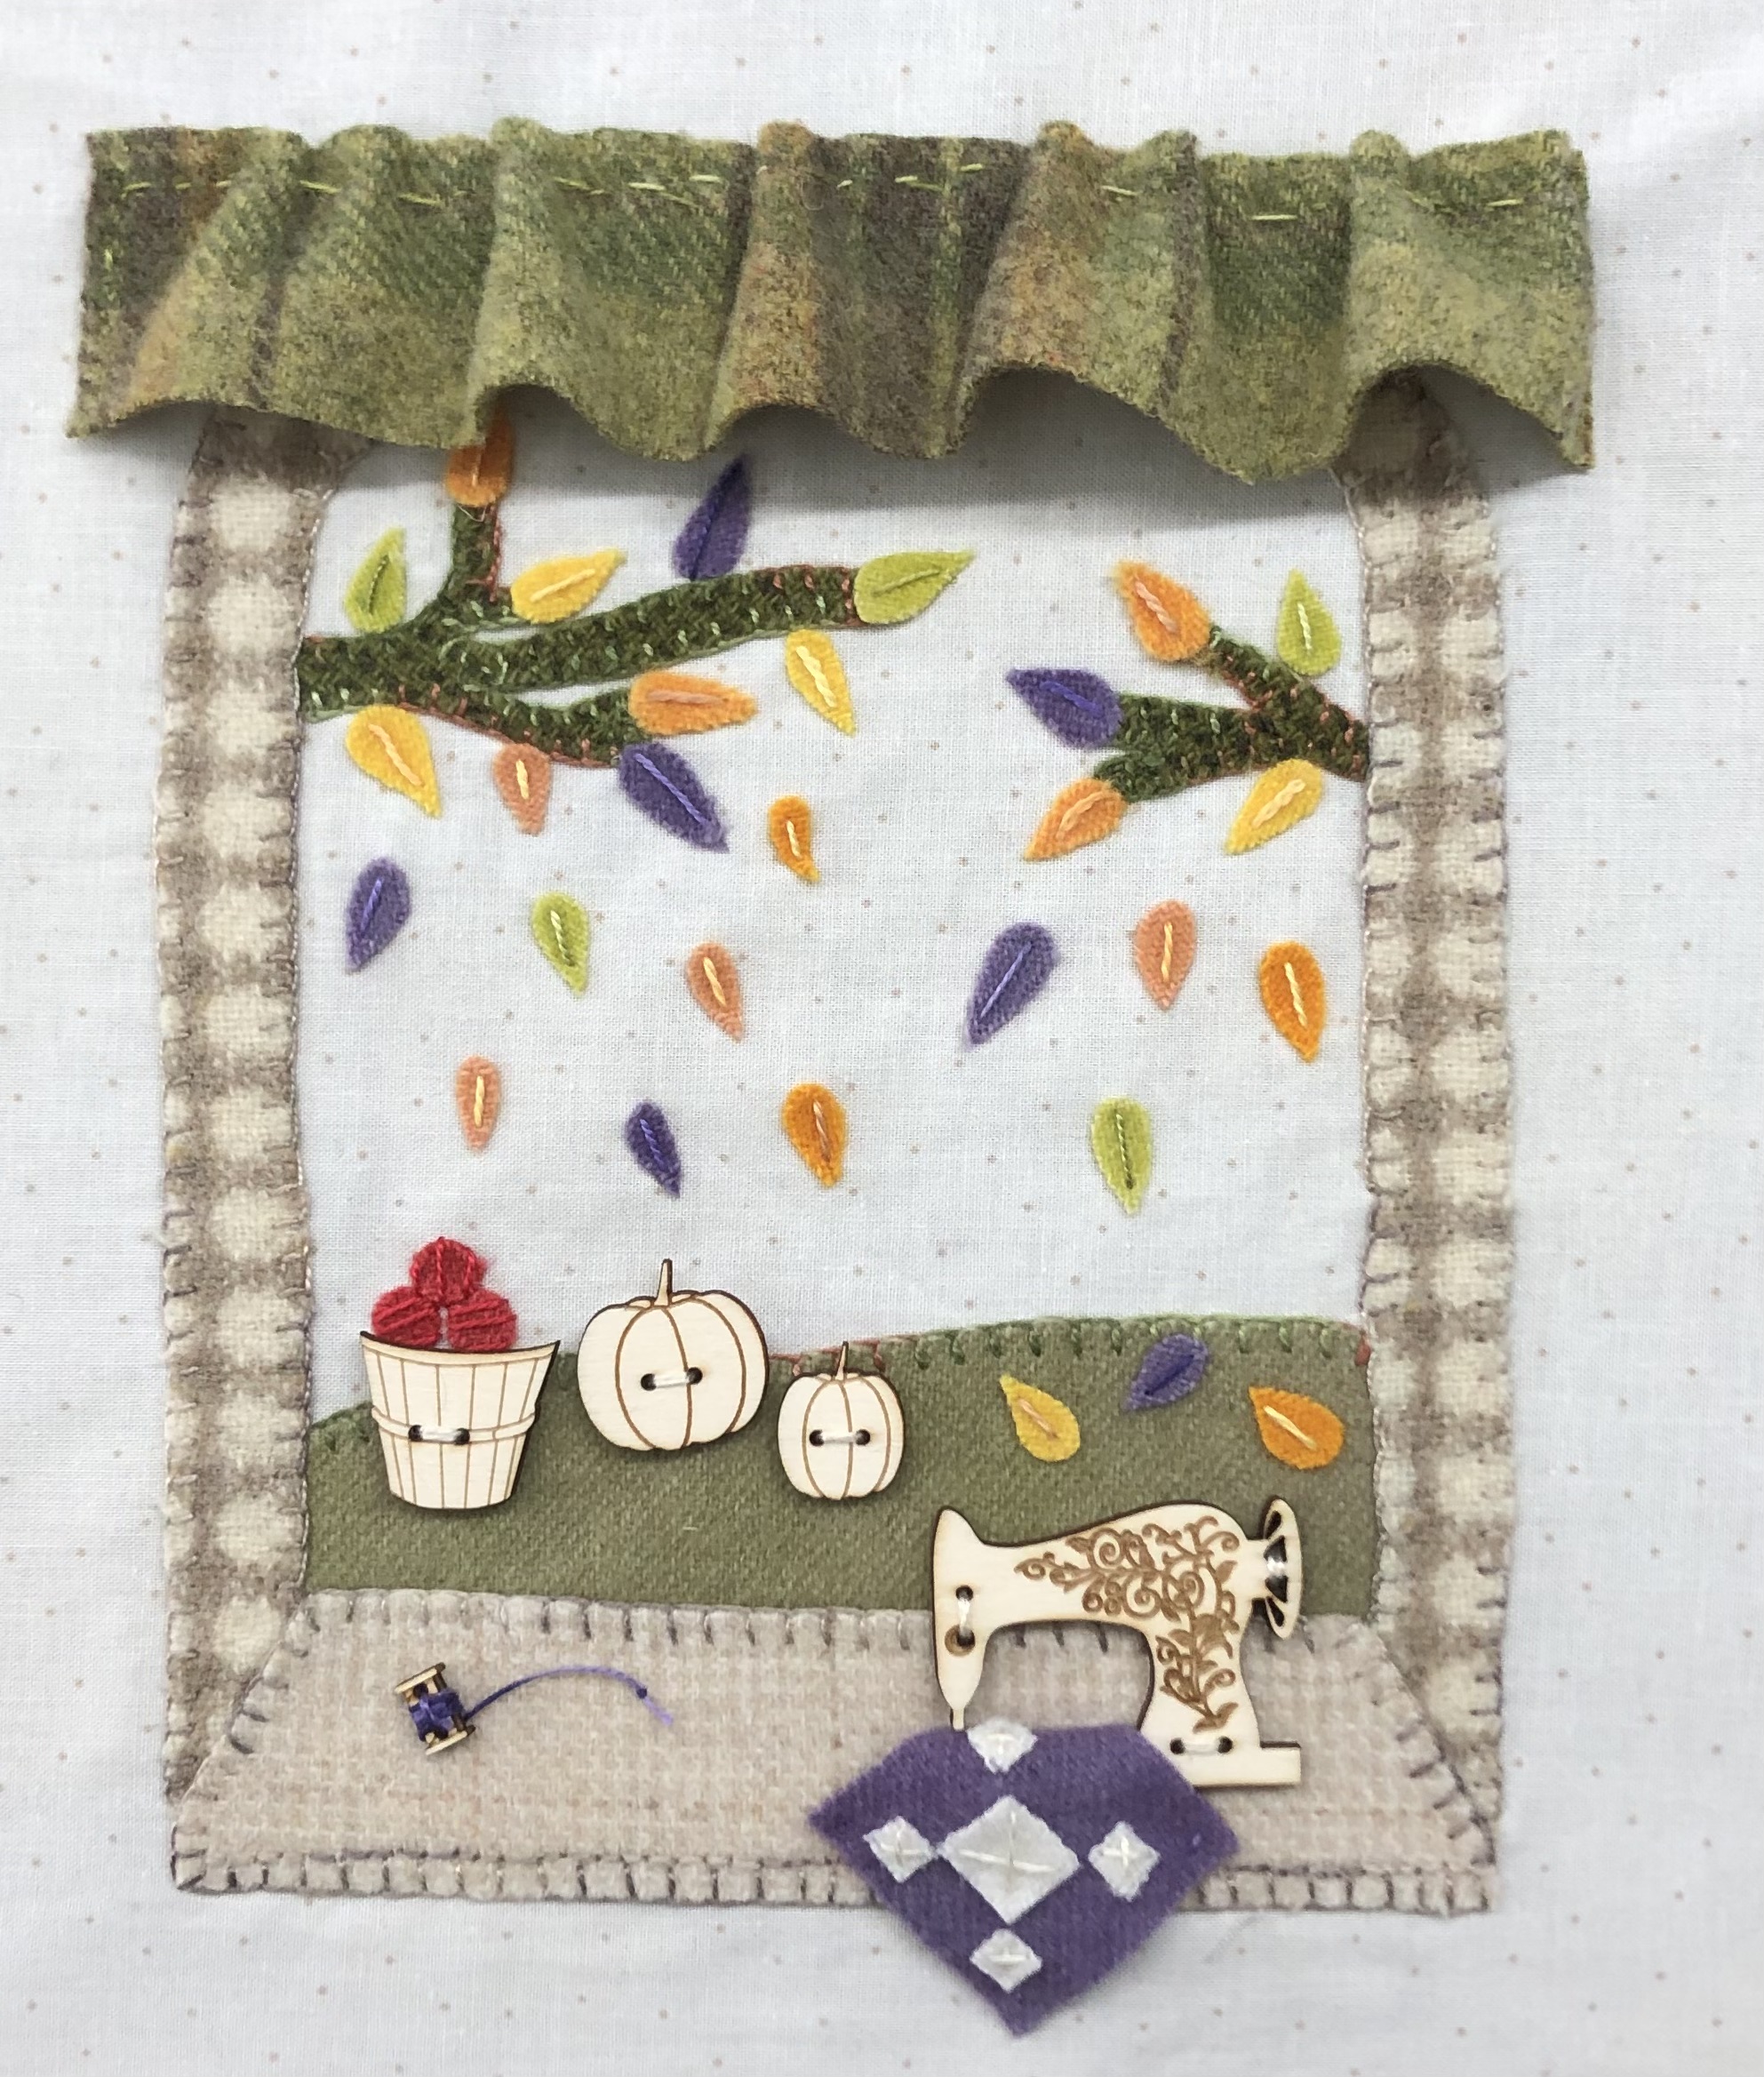 Mary Jane & Friends - The Autumn Windows Ladies - BLOCK 1 - AUTUMN SEWING TIME - PRINTED PATTERN